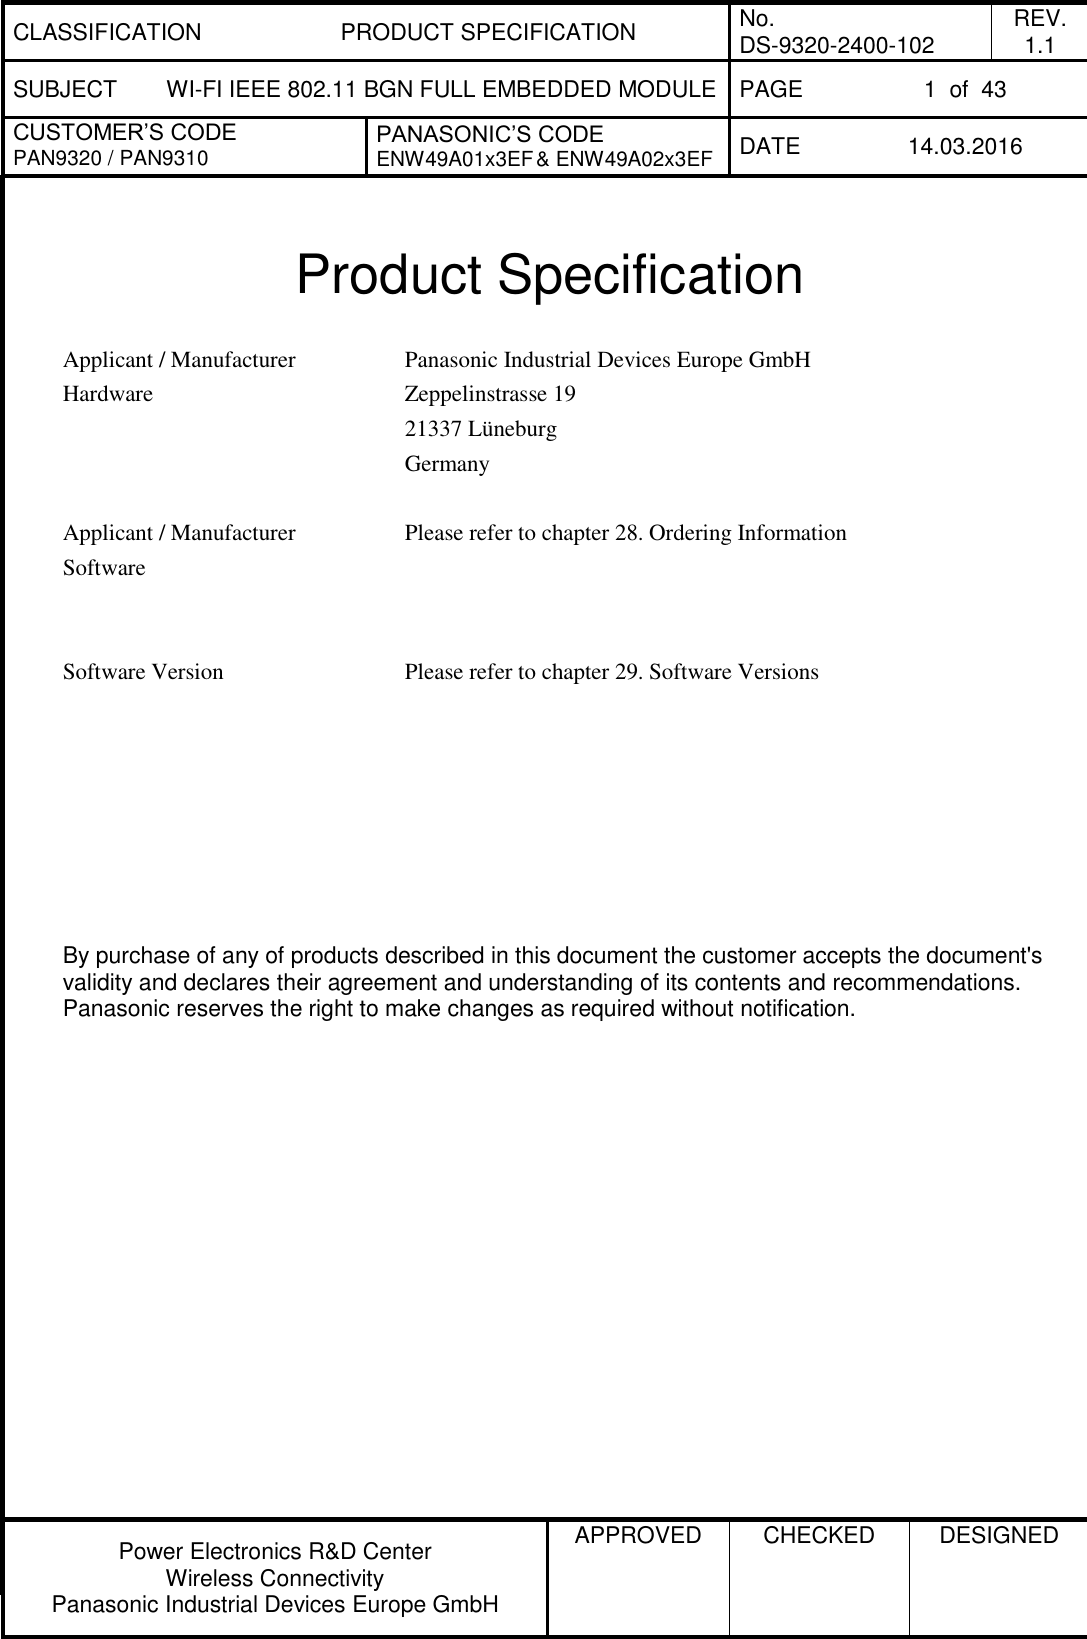 CLASSIFICATION PRODUCT SPECIFICATION No. DS-9320-2400-102 REV. 1.1 SUBJECT WI-FI IEEE 802.11 BGN FULL EMBEDDED MODULE PAGE 1  of  43 CUSTOMER’S CODE PAN9320 / PAN9310 PANASONIC’S CODE ENW49A01x3EF &amp; ENW49A02x3EF DATE 14.03.2016   Power Electronics R&amp;D Center Wireless Connectivity Panasonic Industrial Devices Europe GmbH APPROVED  CHECKED  DESIGNED    Product Specification  Applicant / Manufacturer Hardware Panasonic Industrial Devices Europe GmbH Zeppelinstrasse 19 21337 Lüneburg Germany   Applicant / Manufacturer Software Please refer to chapter 28. Ordering Information    Software Version Please refer to chapter 29. Software Versions            By purchase of any of products described in this document the customer accepts the document&apos;s validity and declares their agreement and understanding of its contents and recommendations. Panasonic reserves the right to make changes as required without notification. 